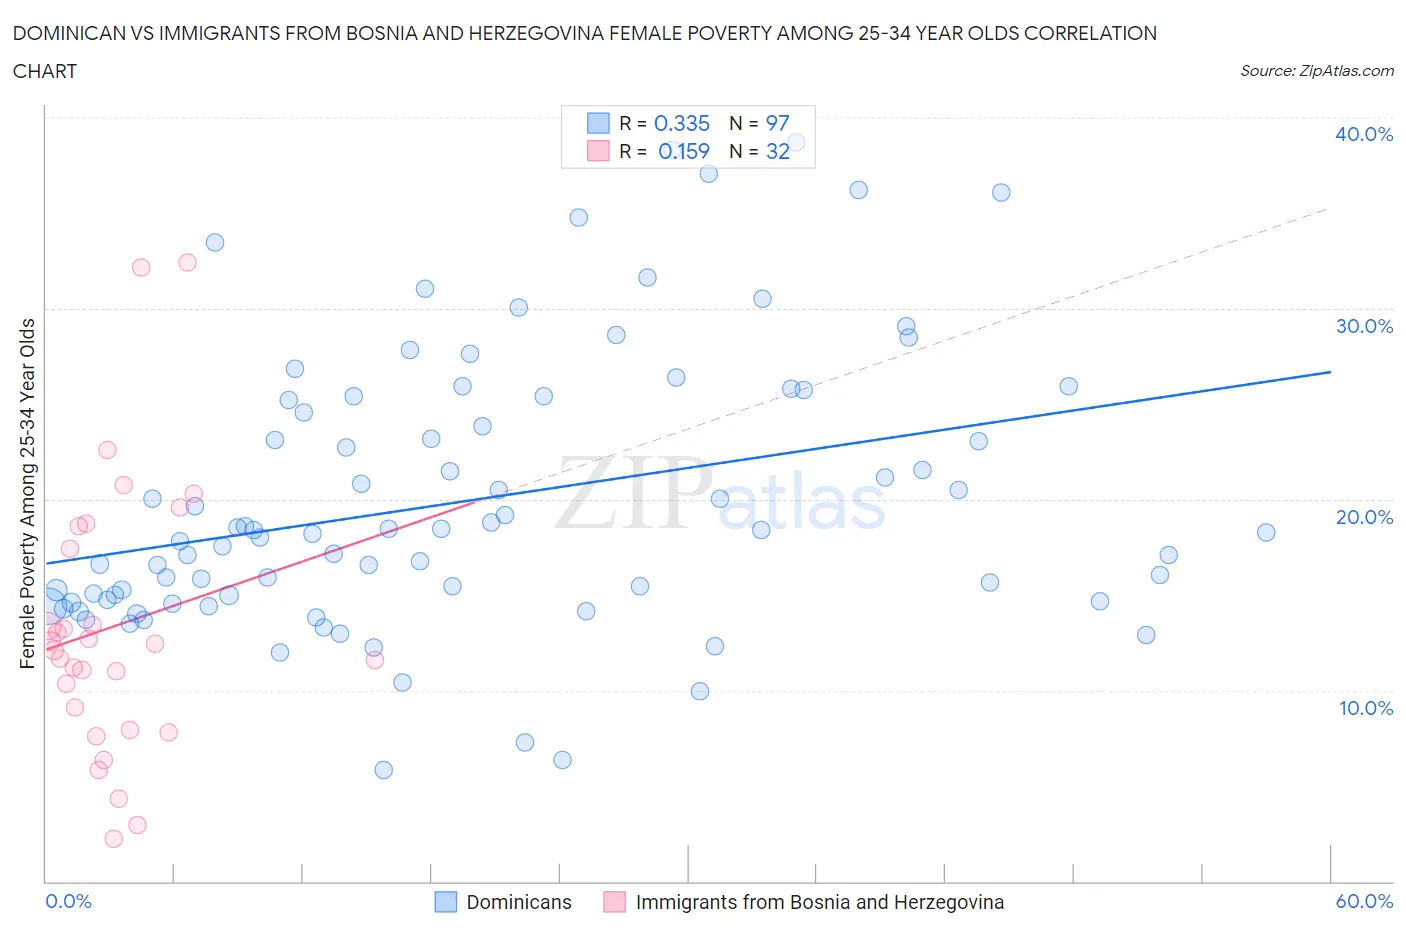 Dominican vs Immigrants from Bosnia and Herzegovina Female Poverty Among 25-34 Year Olds